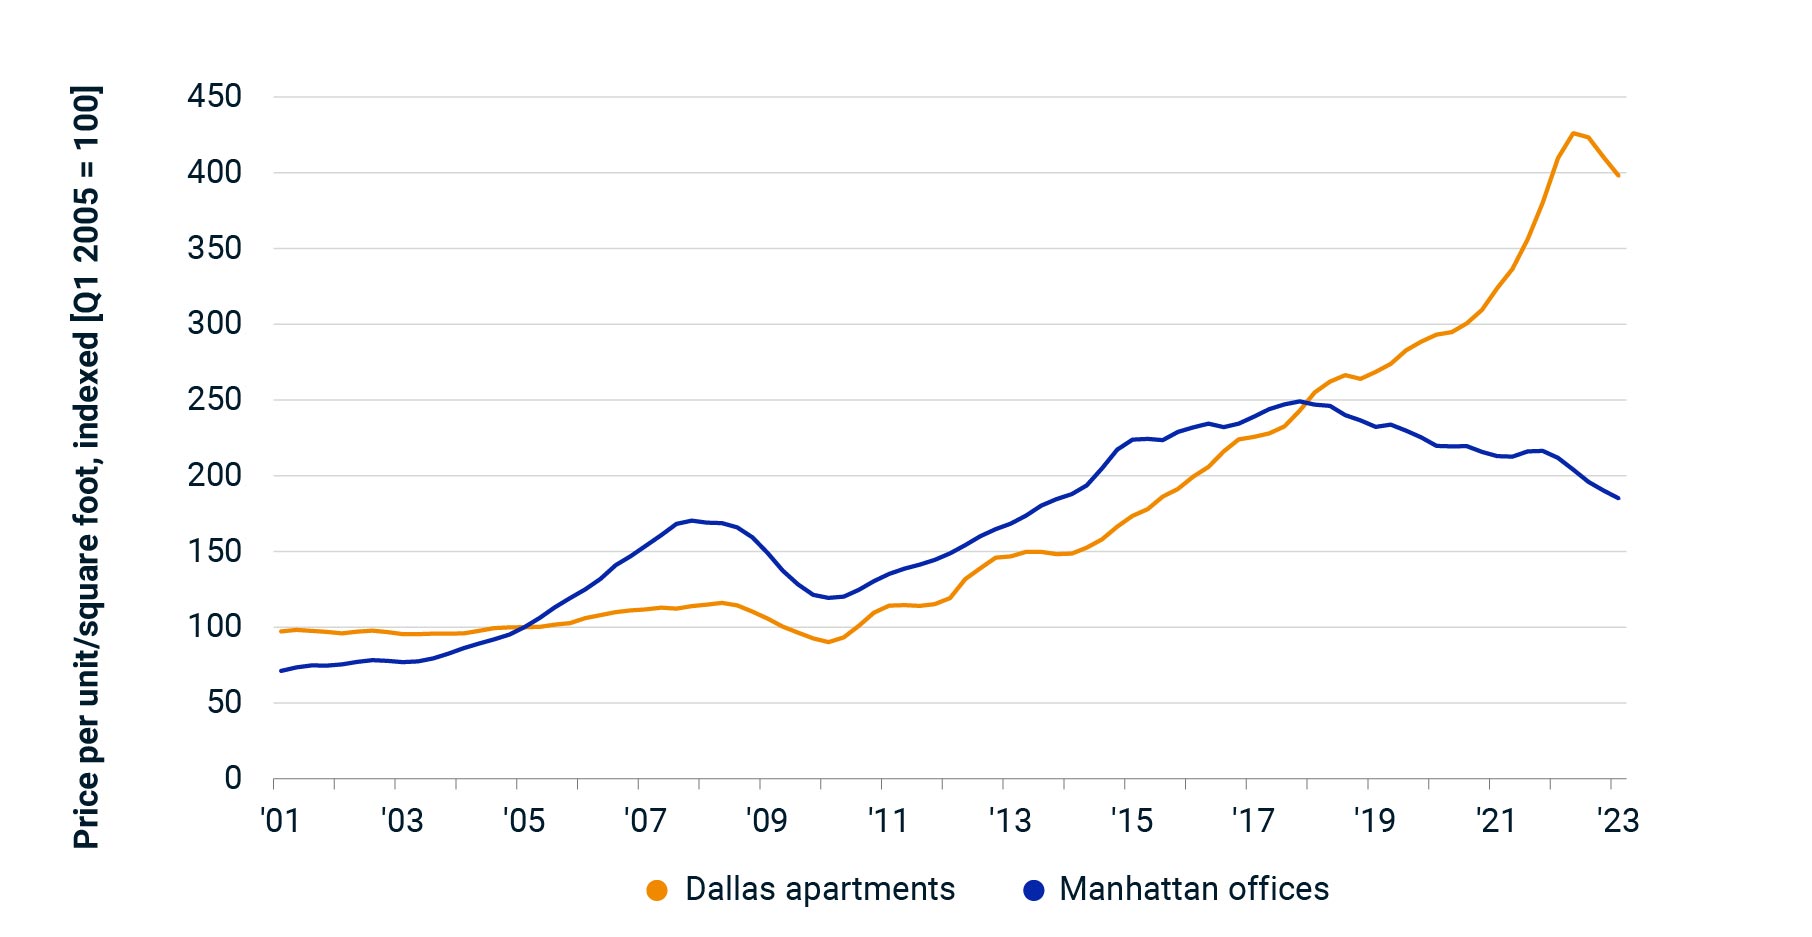 This line graph shows the trends in pricing for Manhattan office buildings and Dallas apartment buildings since 2001.